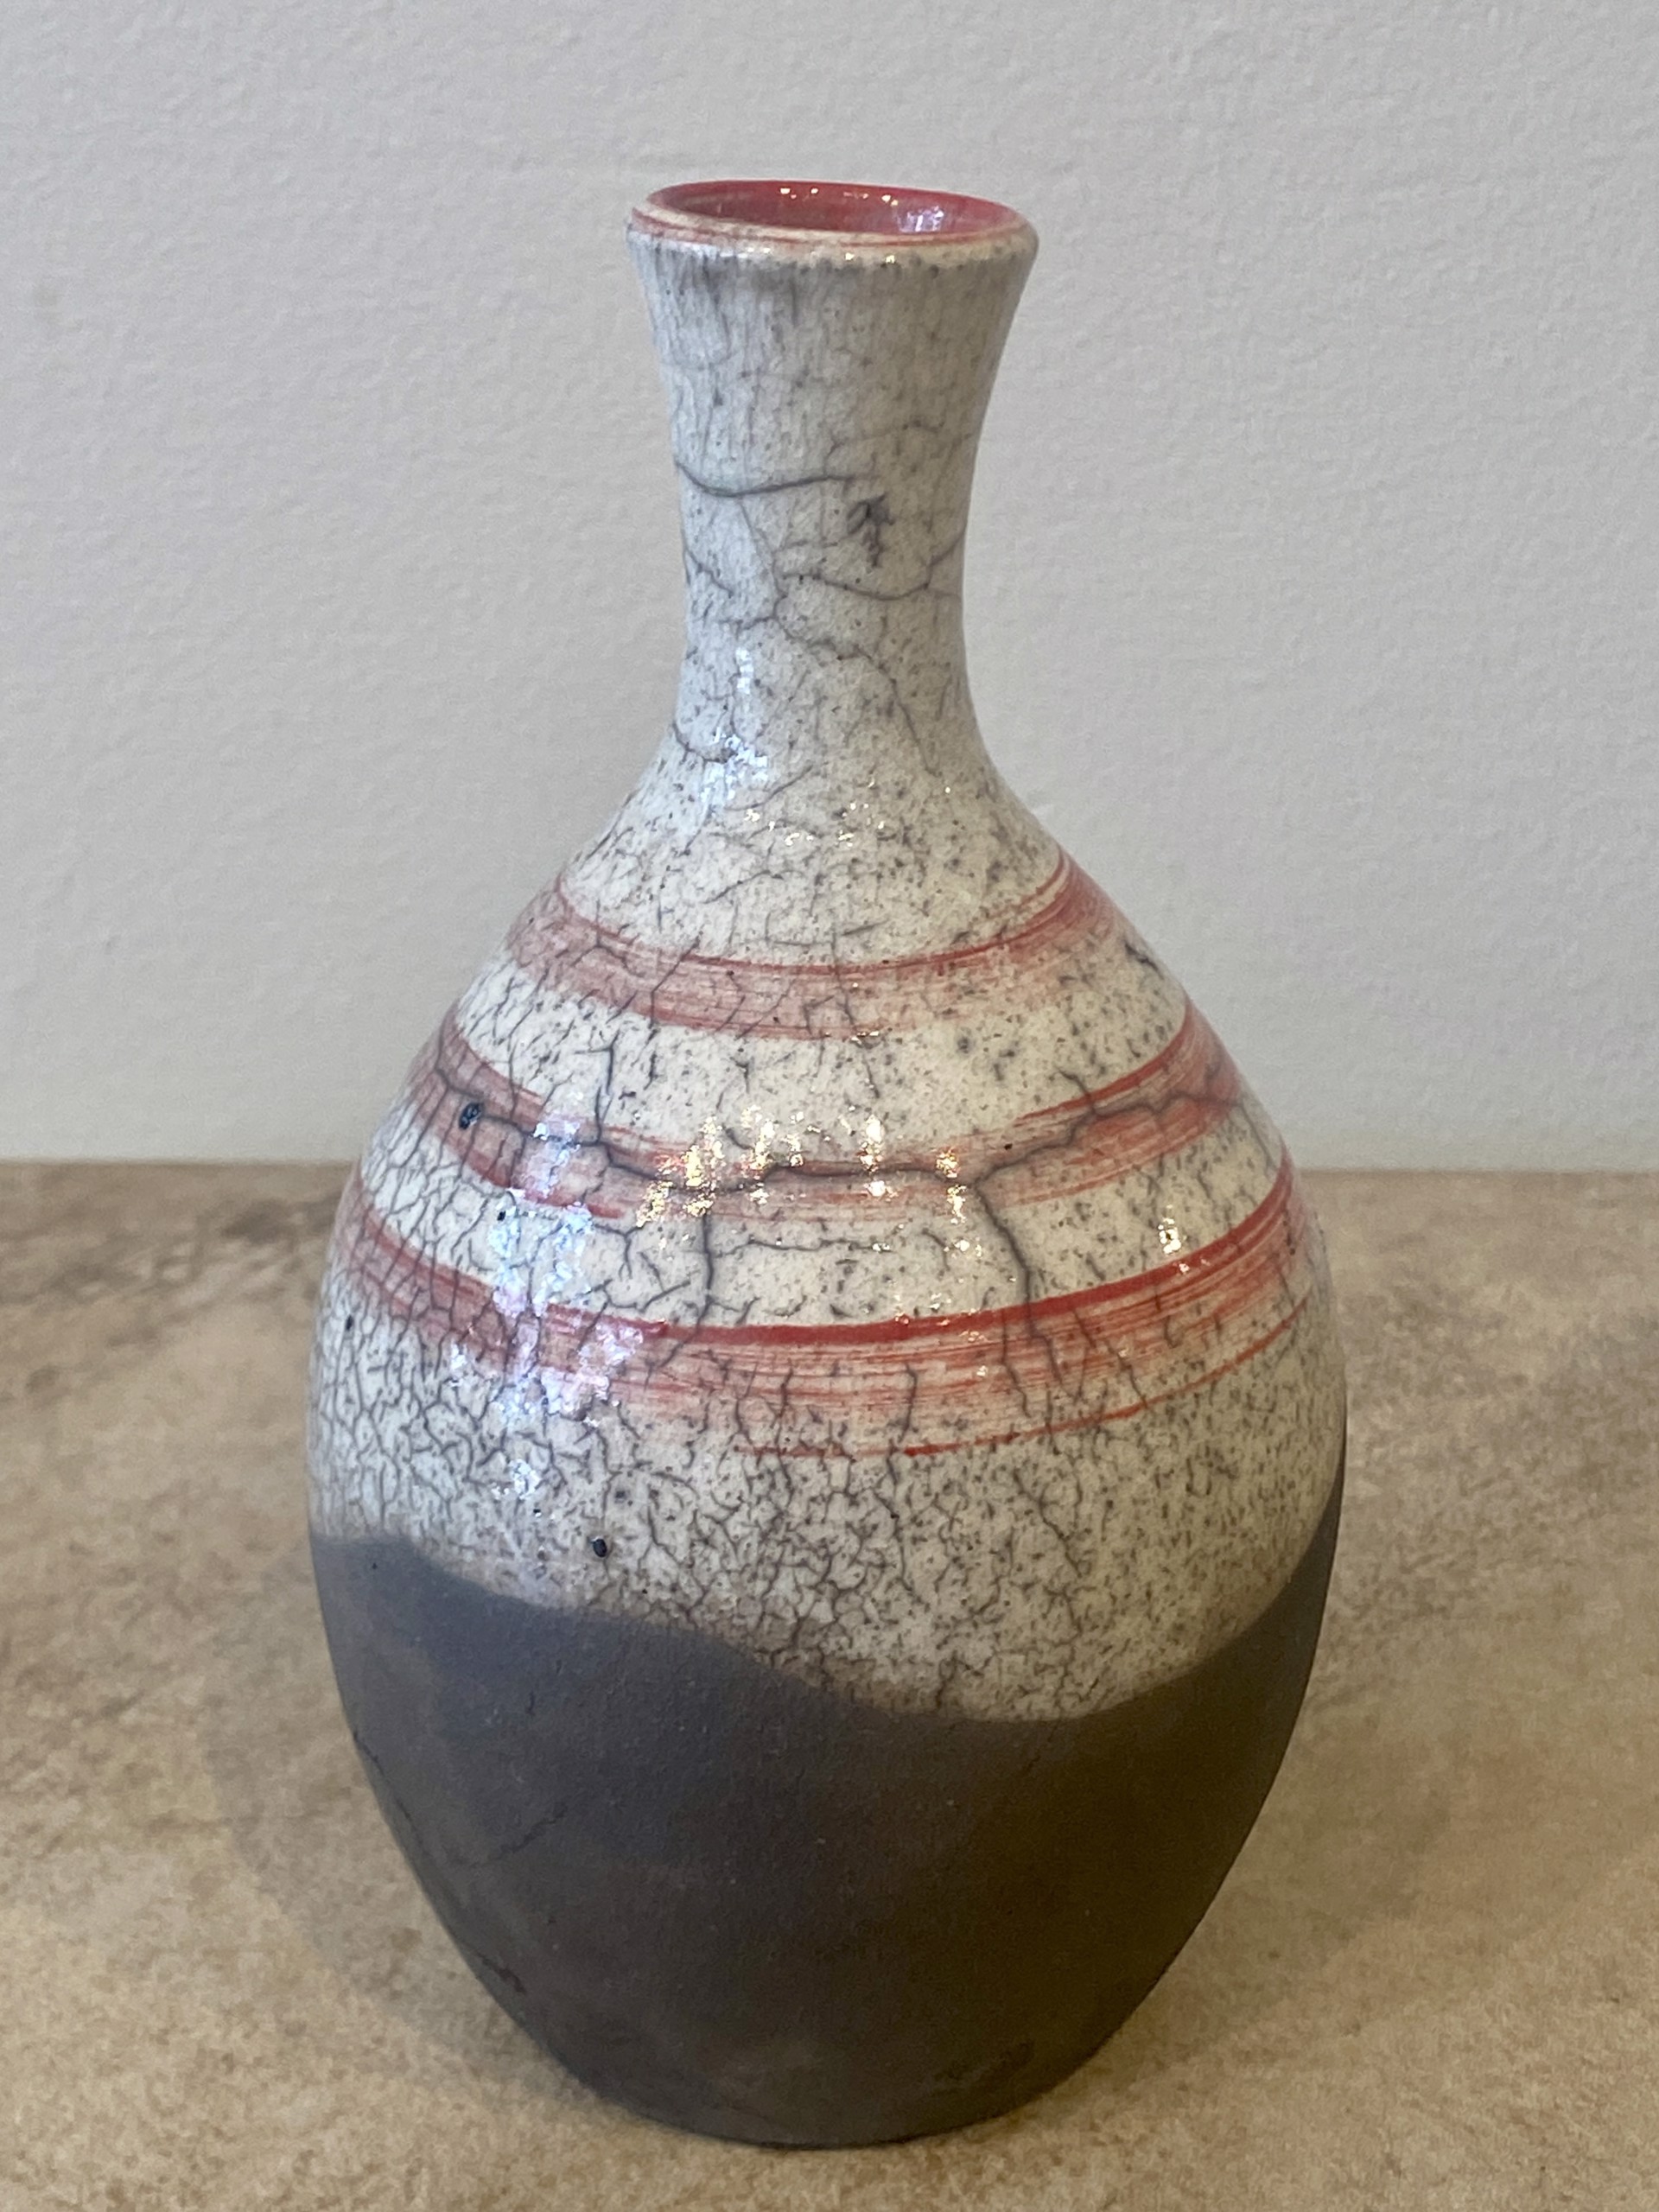 Red Ringed White Crackle Bottle SB23-40 by Silas Bradley